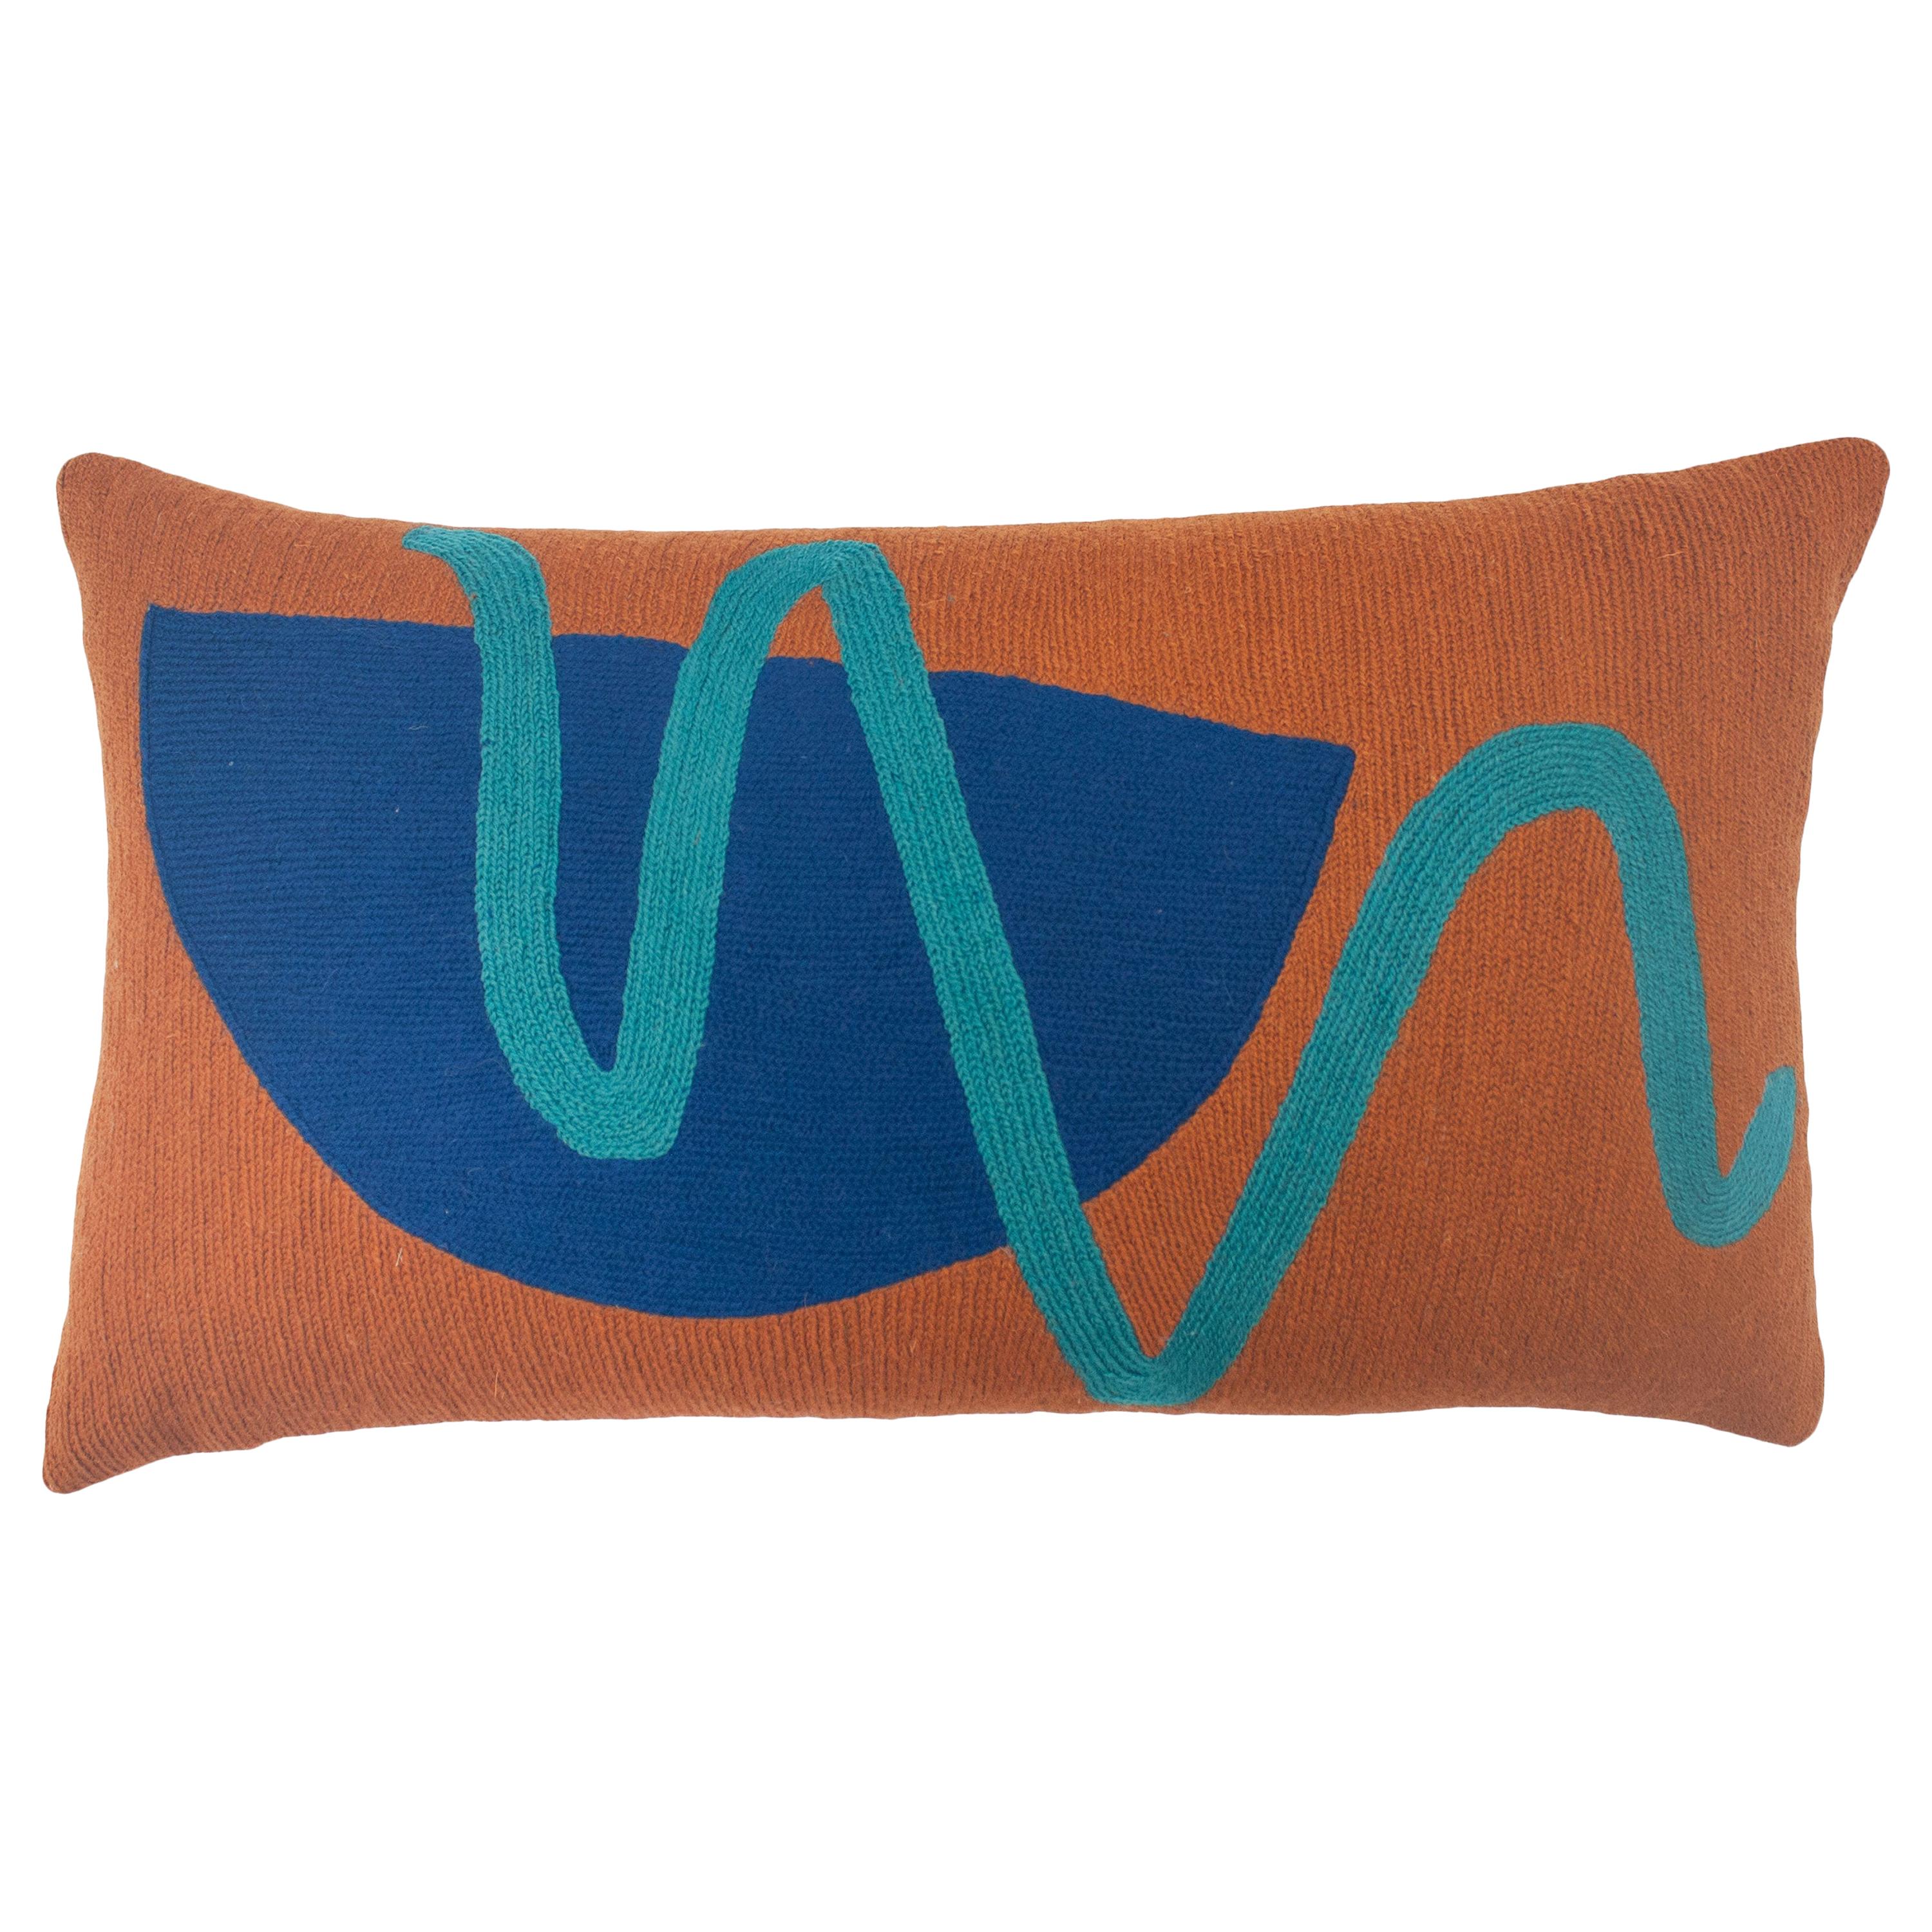 Blah Blah Squiggle Hand Embroidered Modern Geometric Throw Pillow Cover